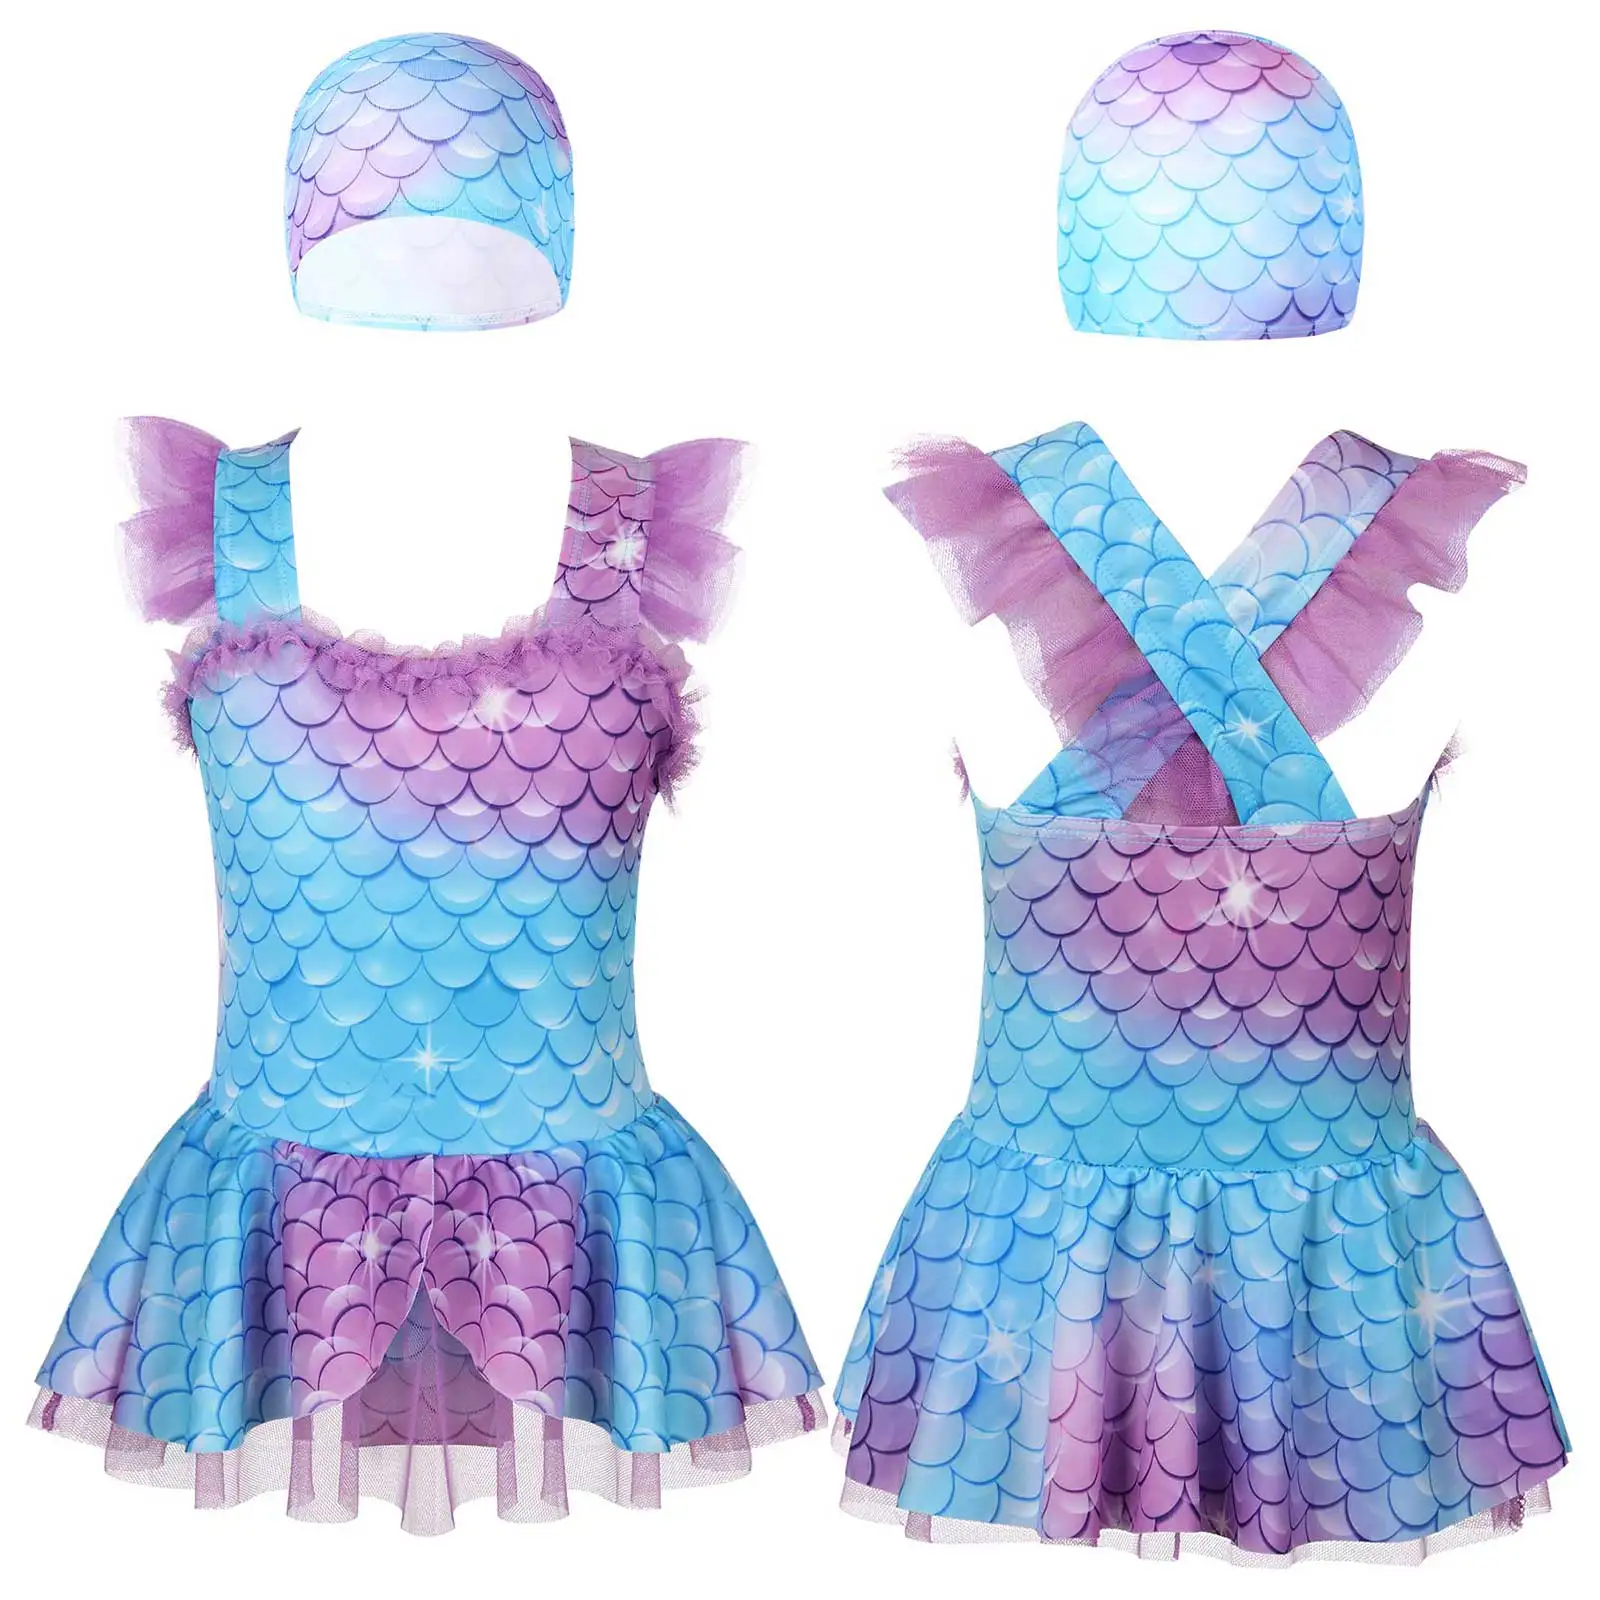 Kids Girls 1Pcs Fish Scales Print Mermaid Dress Square Neck Cross Straps Open Back Swim Bodysuit with Attached Underwear and Hat